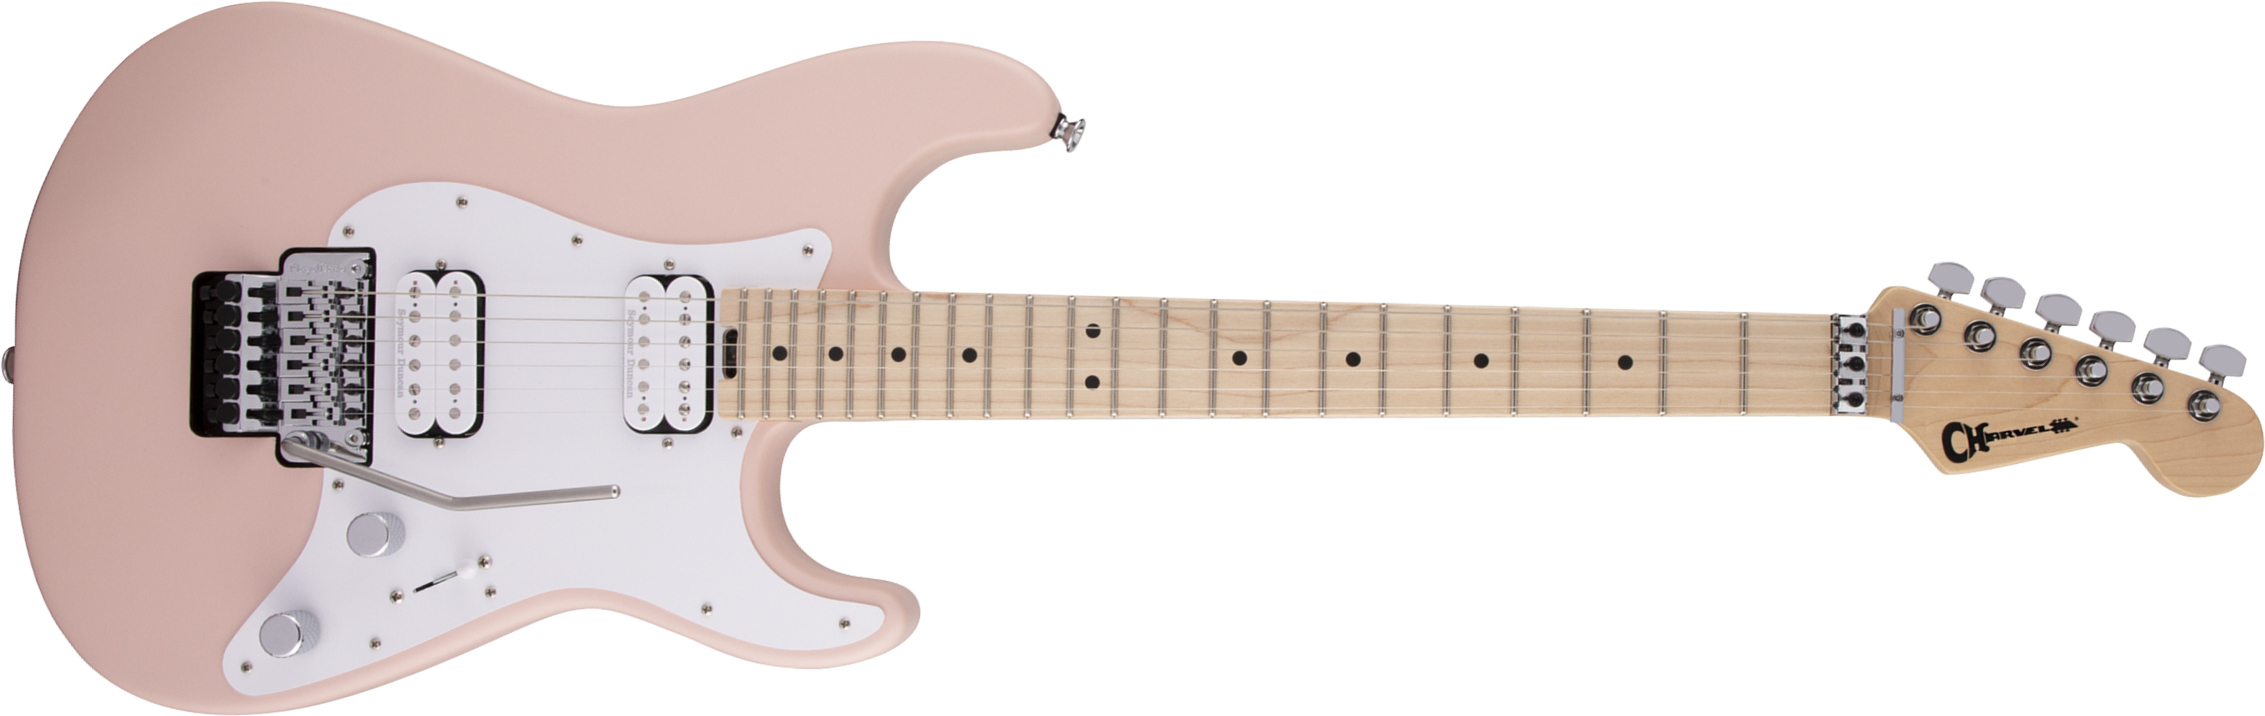 Charvel So-cal Style 1 Hh  Fr M Pro-mod 2h Seymour Duncan Mn - Satin Shell Pink - Str shape electric guitar - Main picture